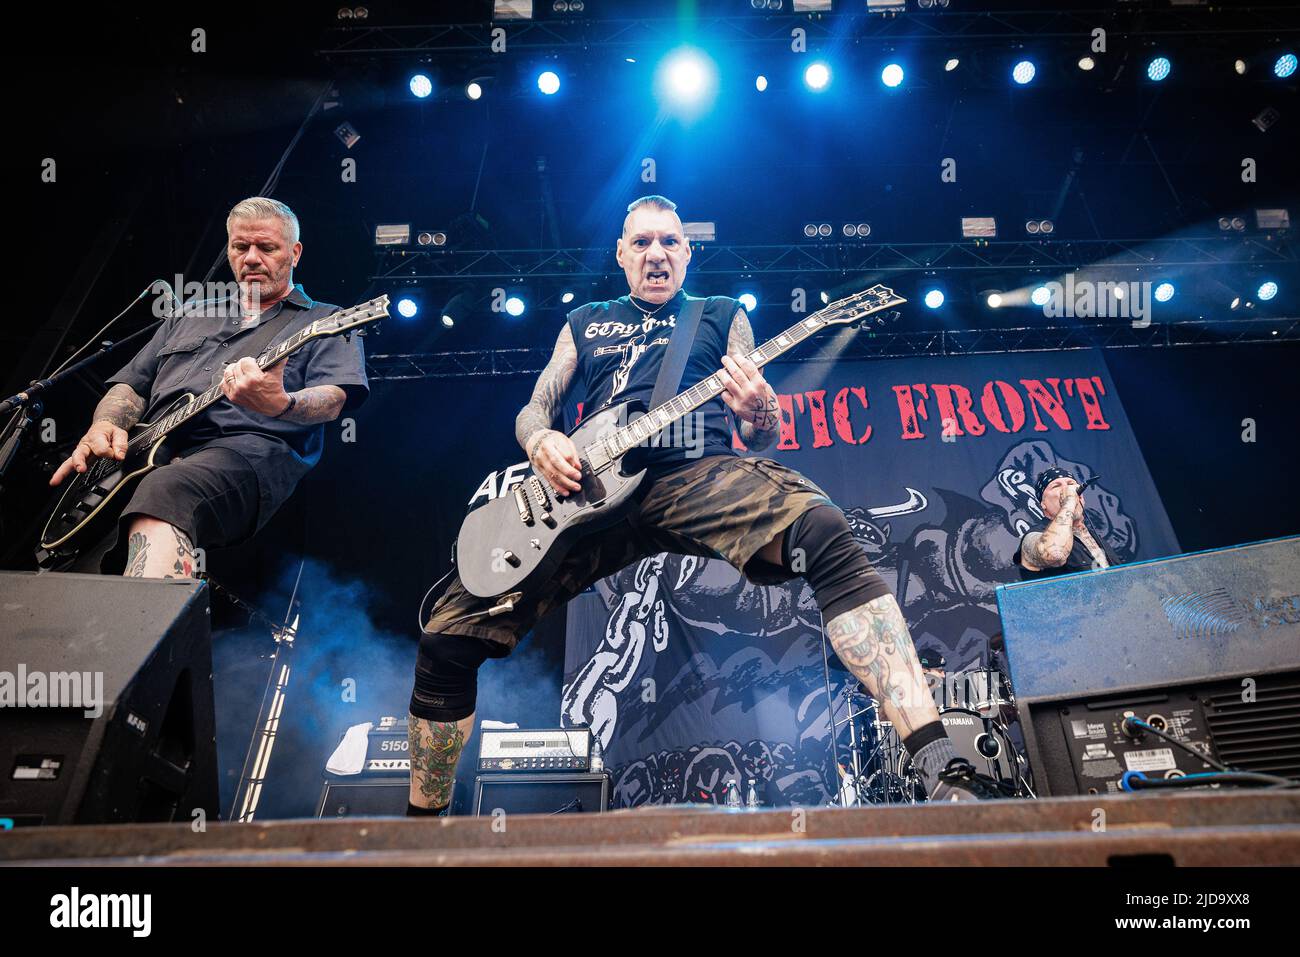 Copenhagen, Denmark. 17th, June 2022. The American hardcore punk band Agnostic Front performs a live concert during the Danish heavy metal festival Copenhell 2022 in Copenhagen. Here guitarist Vinnie Stigma is seen live on stage. (Photo credit: Gonzales Photo - Peter Troest). Stock Photo